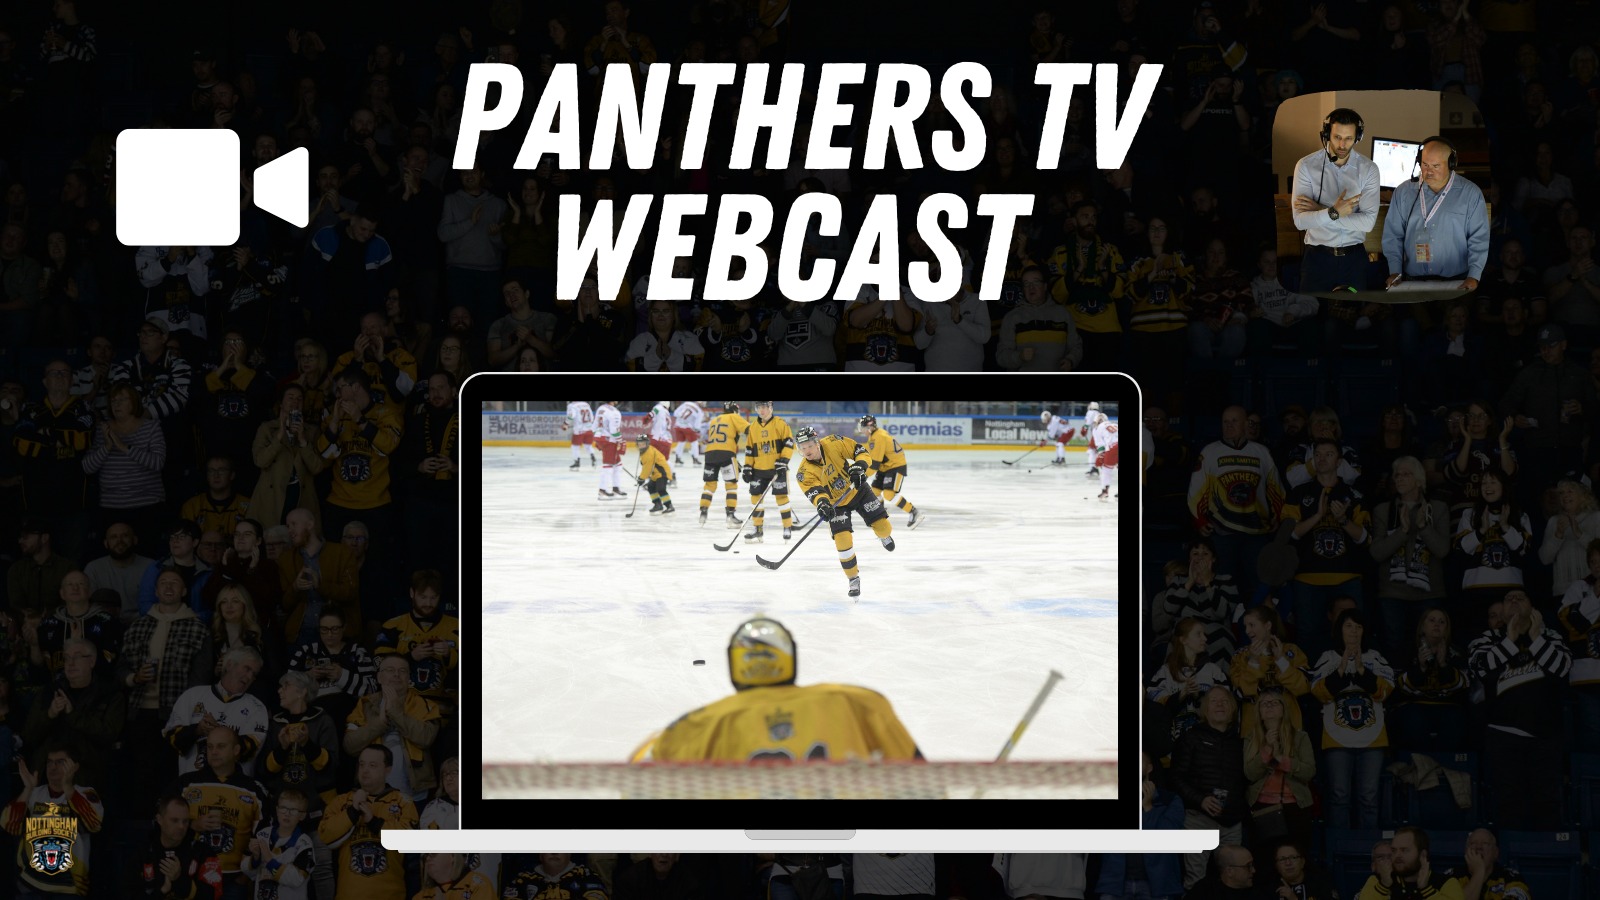 WATCH PANTHERS TV WEBCAST TONIGHT WITH BLAZE IN TOWN Top Image